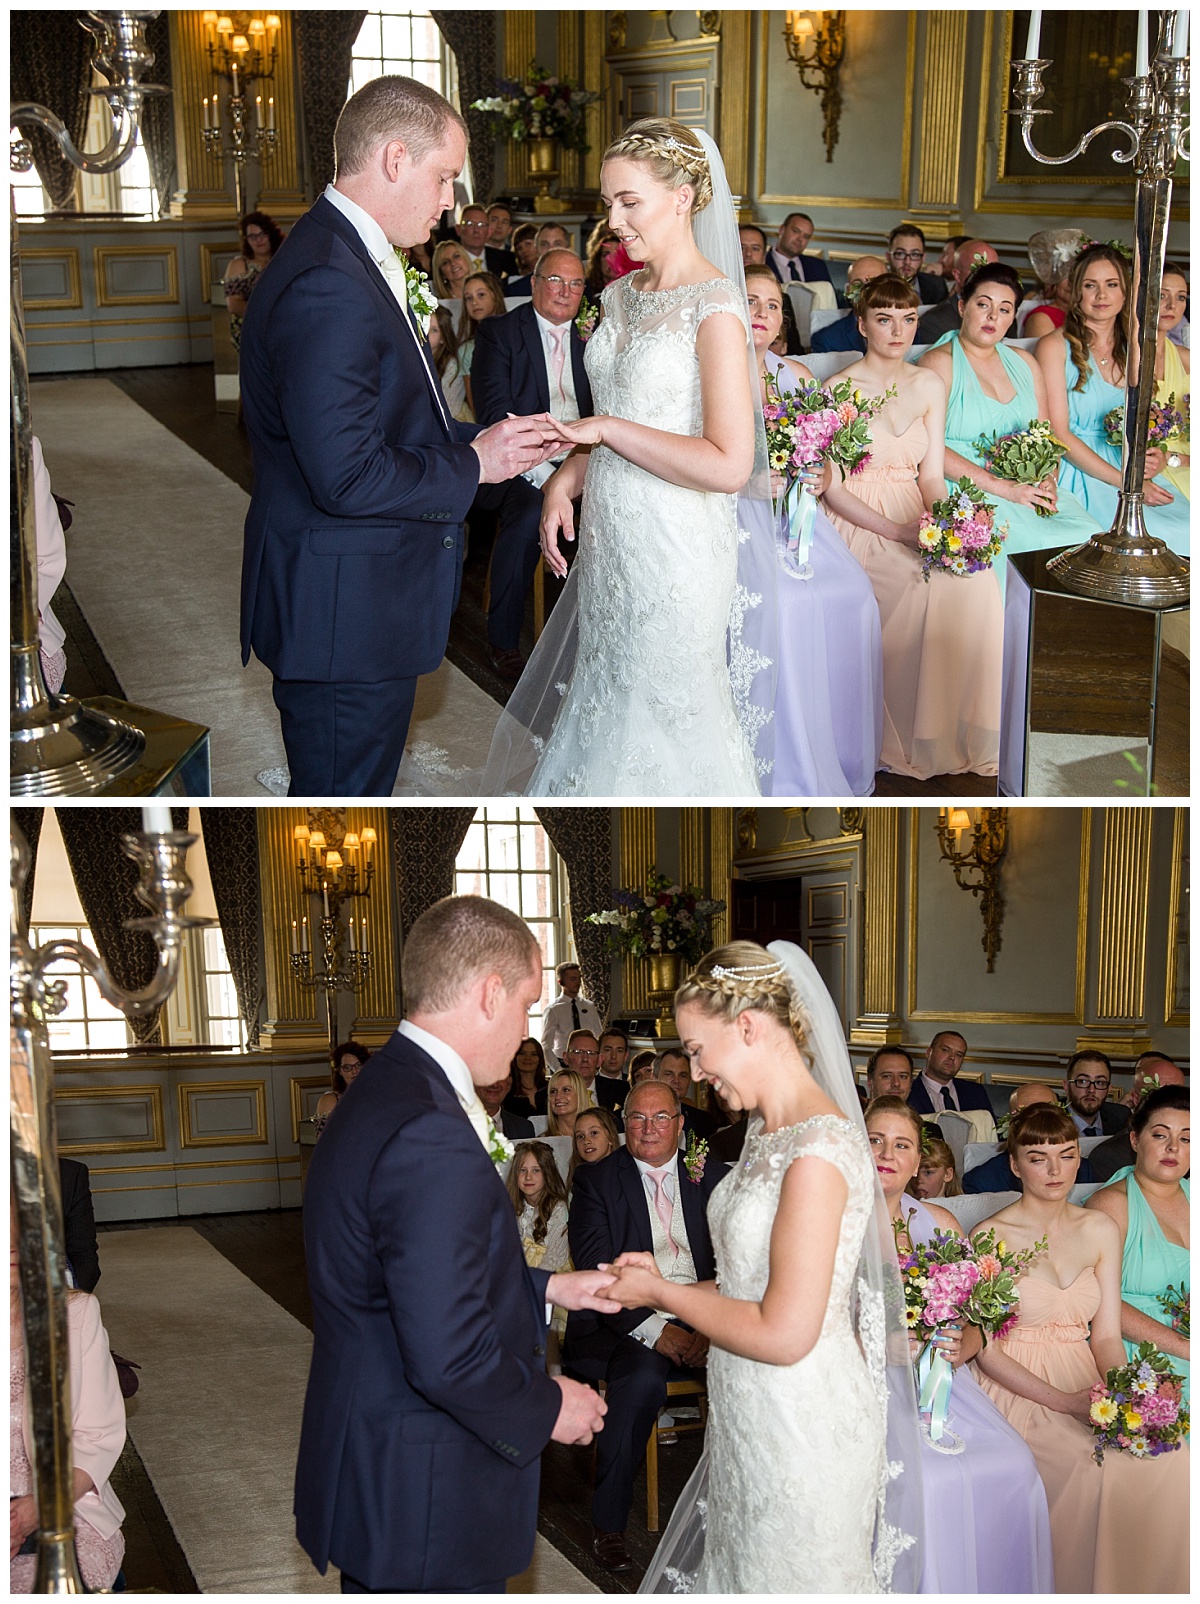 Mel and Lewis's Knowsley Hall wedding 14